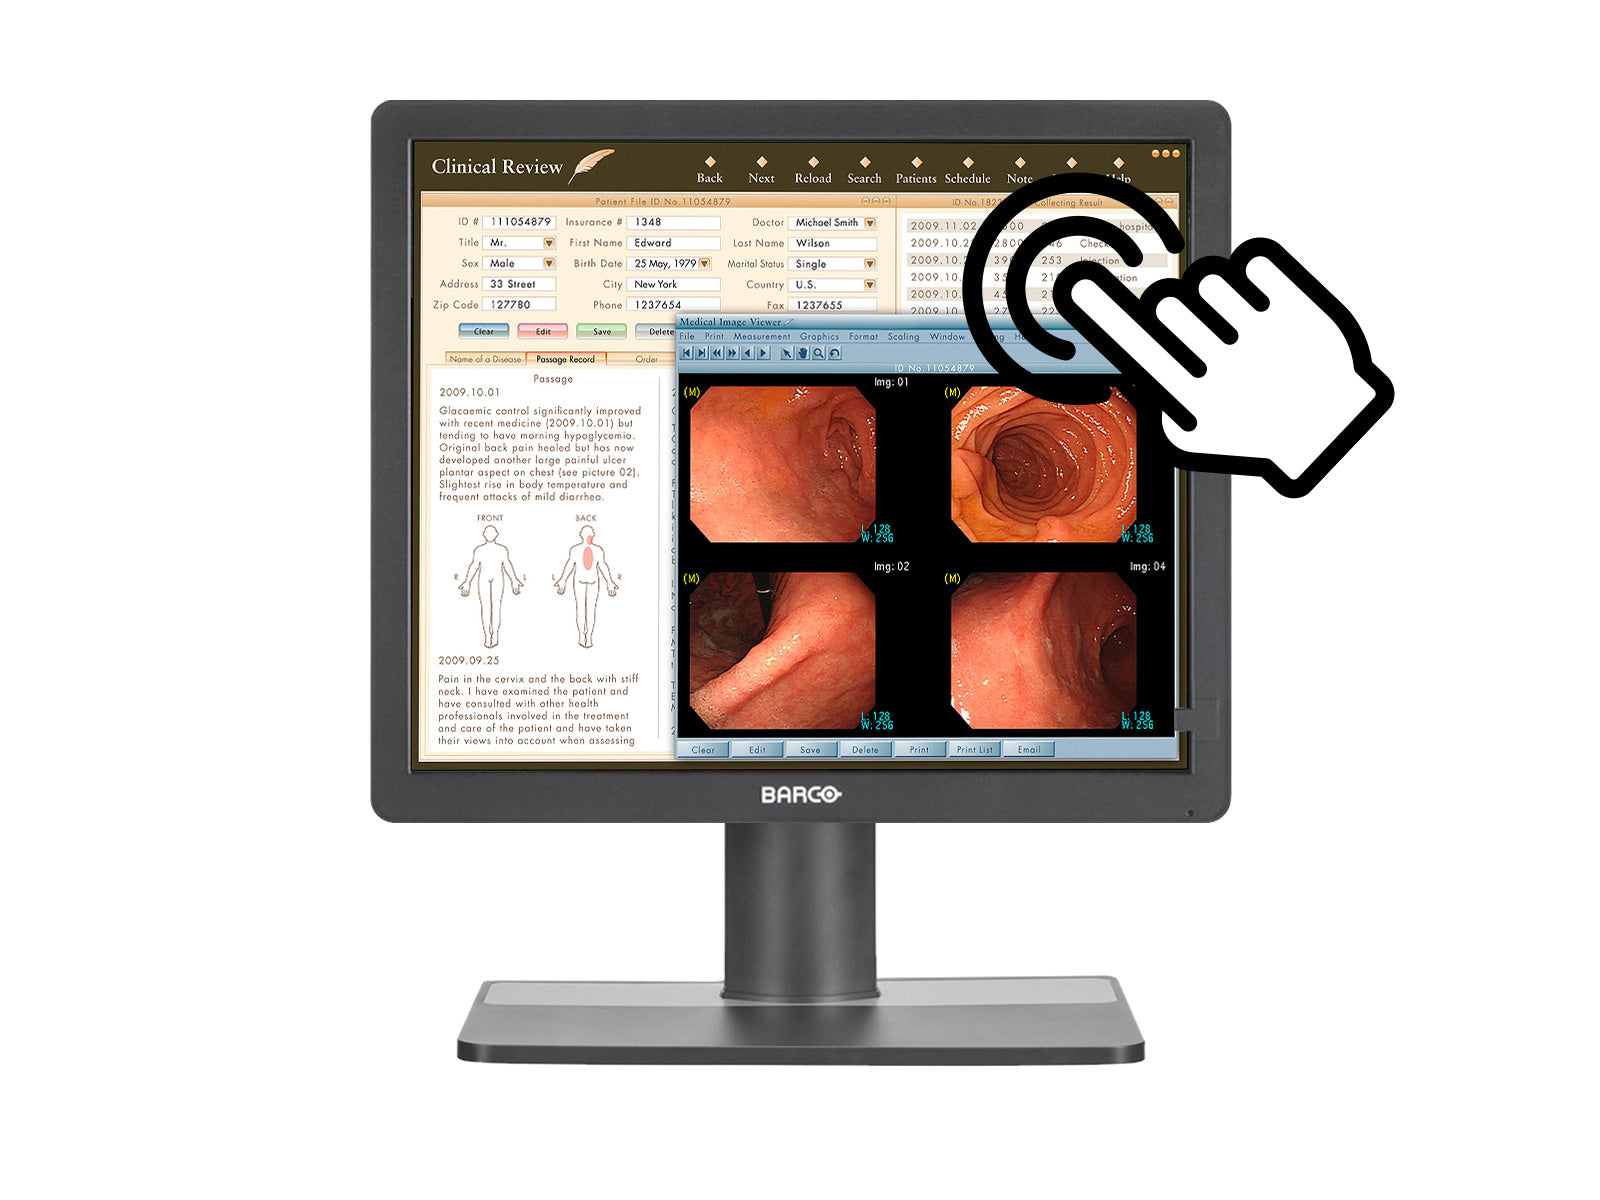 Barco MDRC-1219 TS 1MP 19" Color Touchscreen Clinical Review Display Monitors.com 